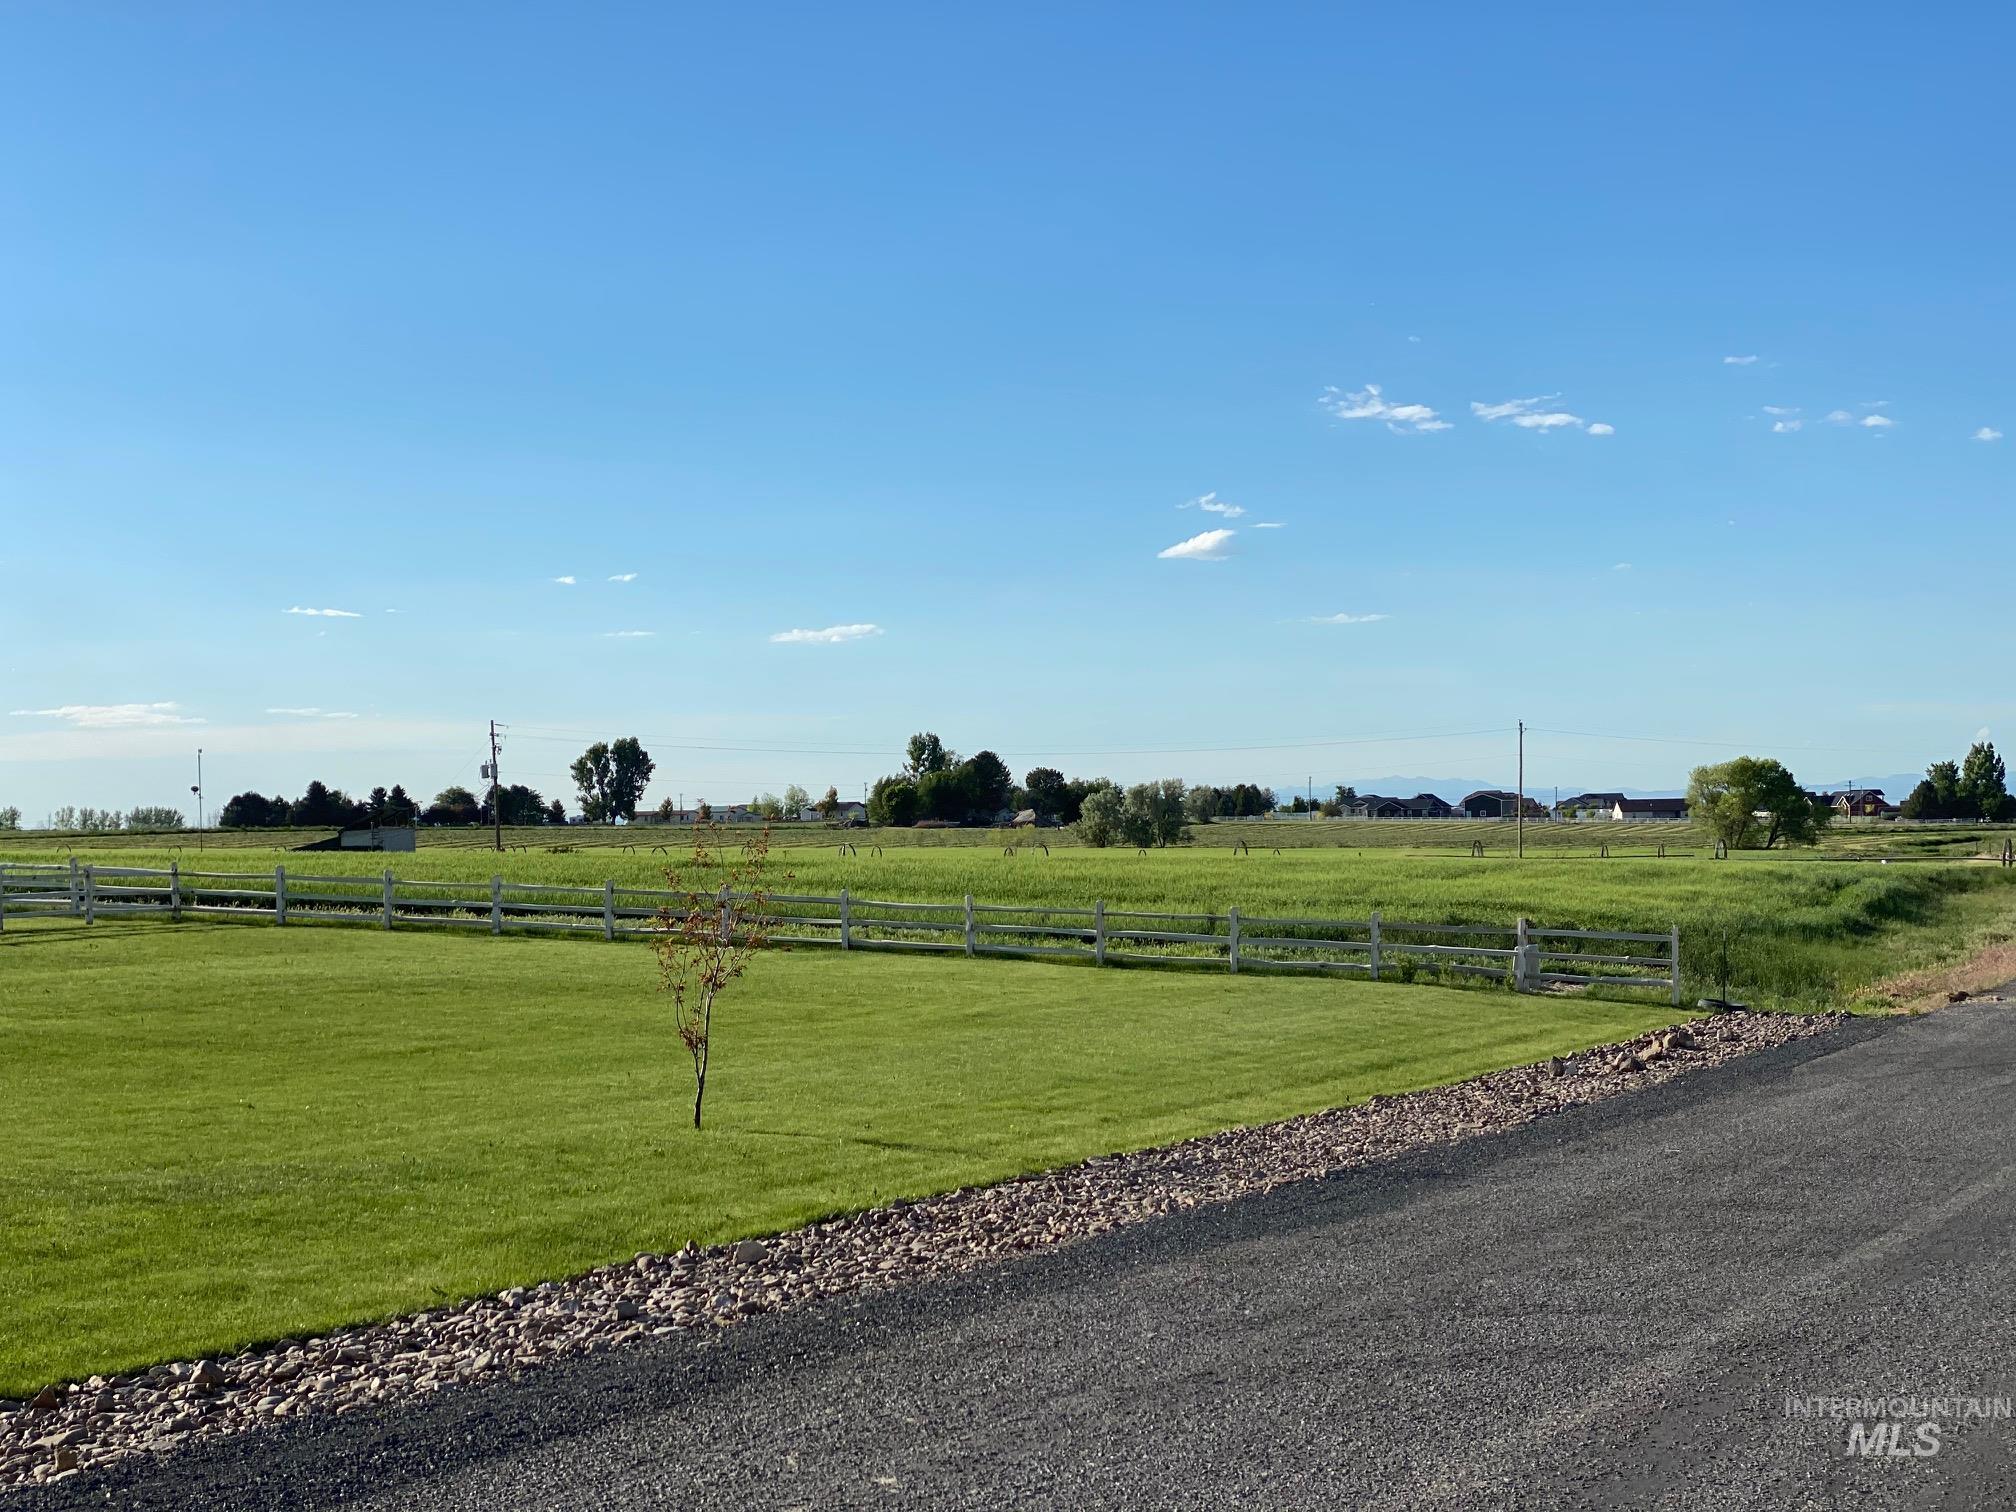 3730 N 2469 E Seabiscuit Drive, Twin Falls, Idaho 83301, Land For Sale, Price $135,900,MLS 98891216